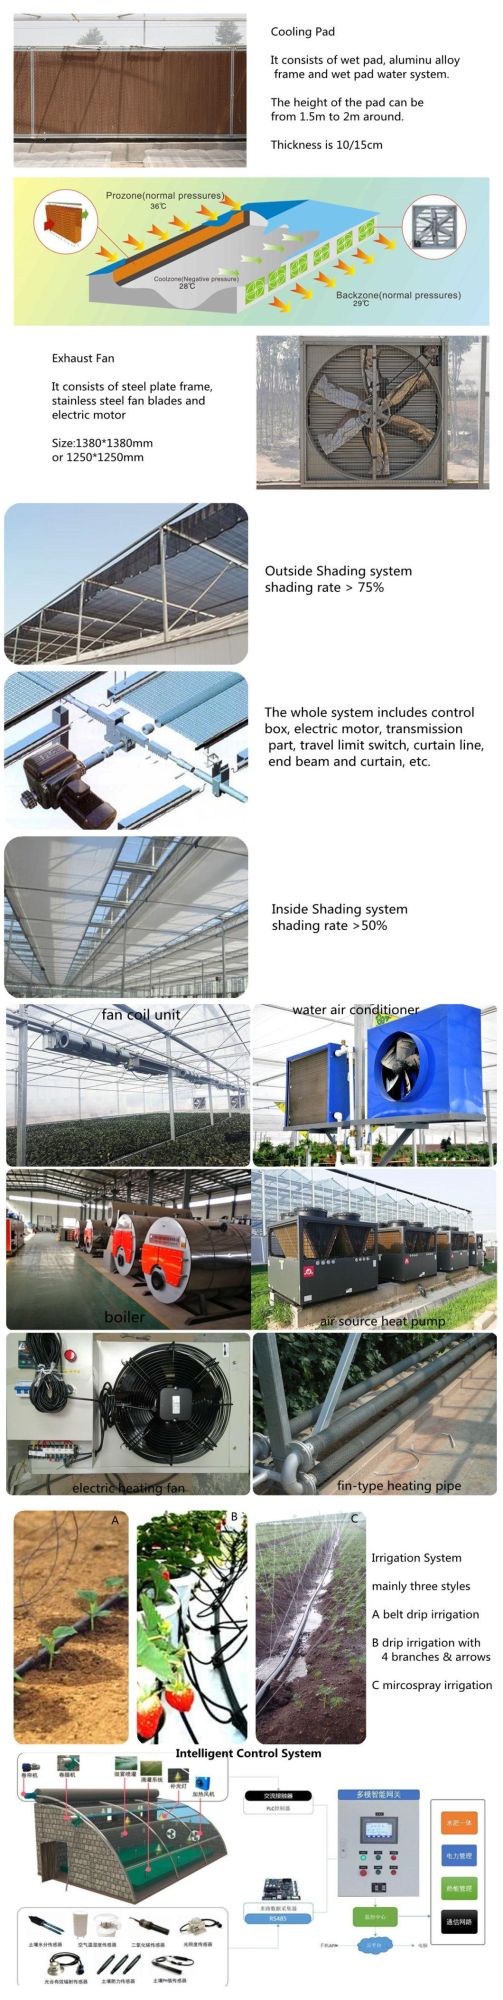 Seedling Tray Seeding Machine with Auto Control for Labor Saving for Agriculture/Farming